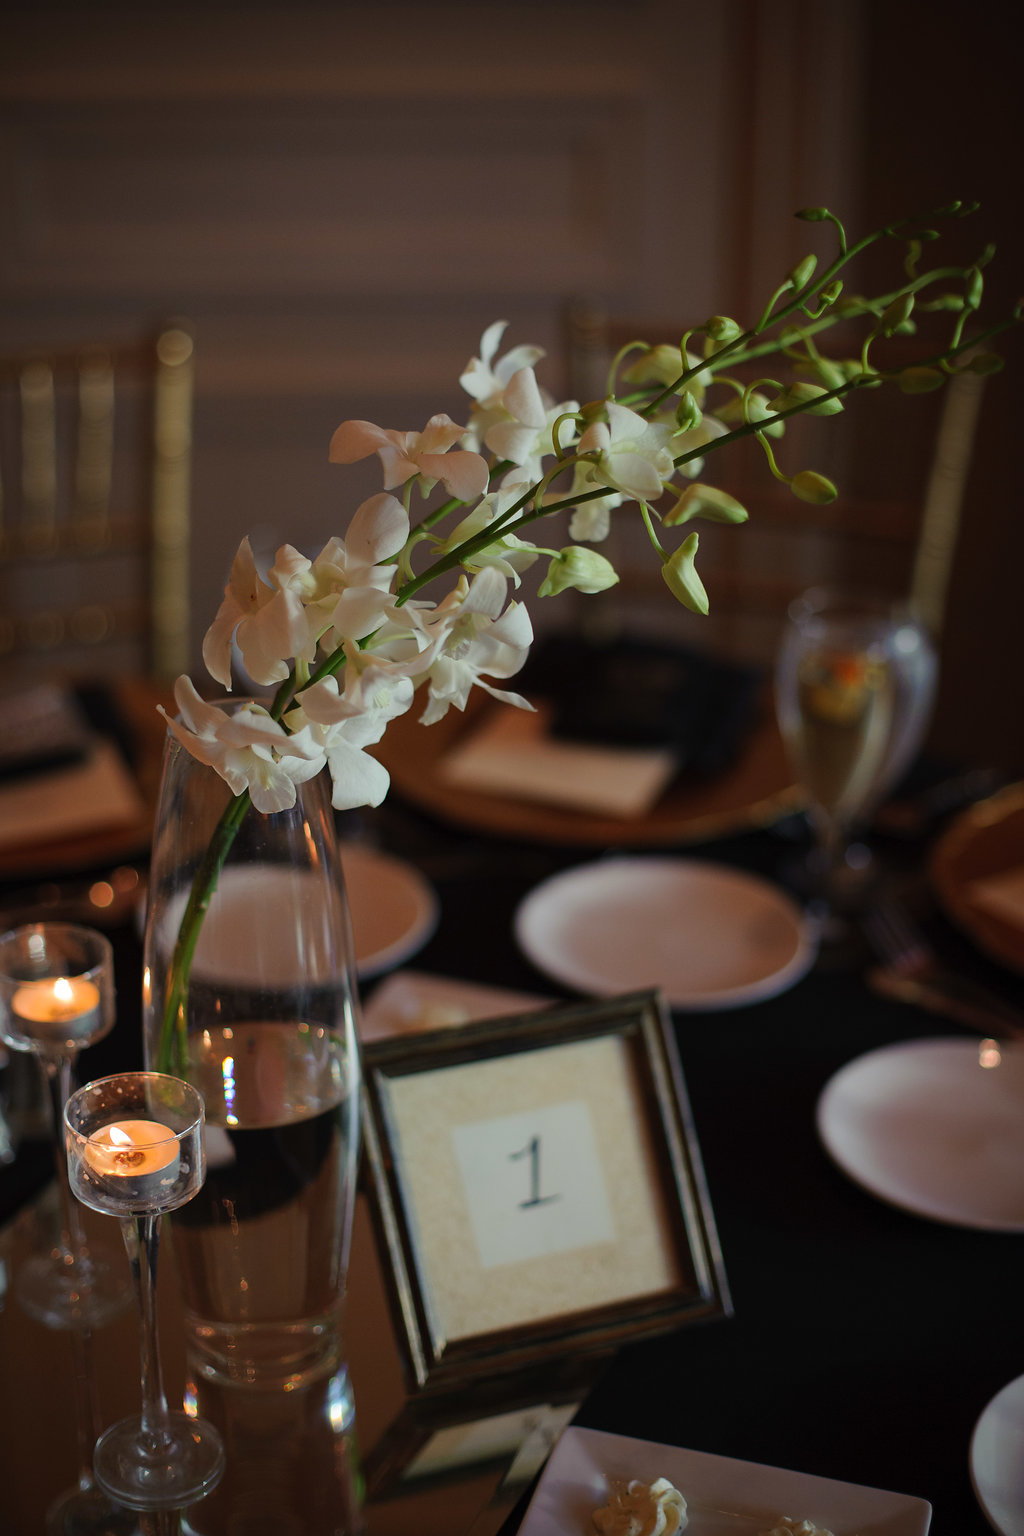 Elegant Black and White Wedding Reception Table Decor with Simple Vintage Wooden Frame Table Number, Simple Orchid Centerpiece in Tall Glass Vase, and Tall Glass Votive Candleholders | Tampa Bay Wedding